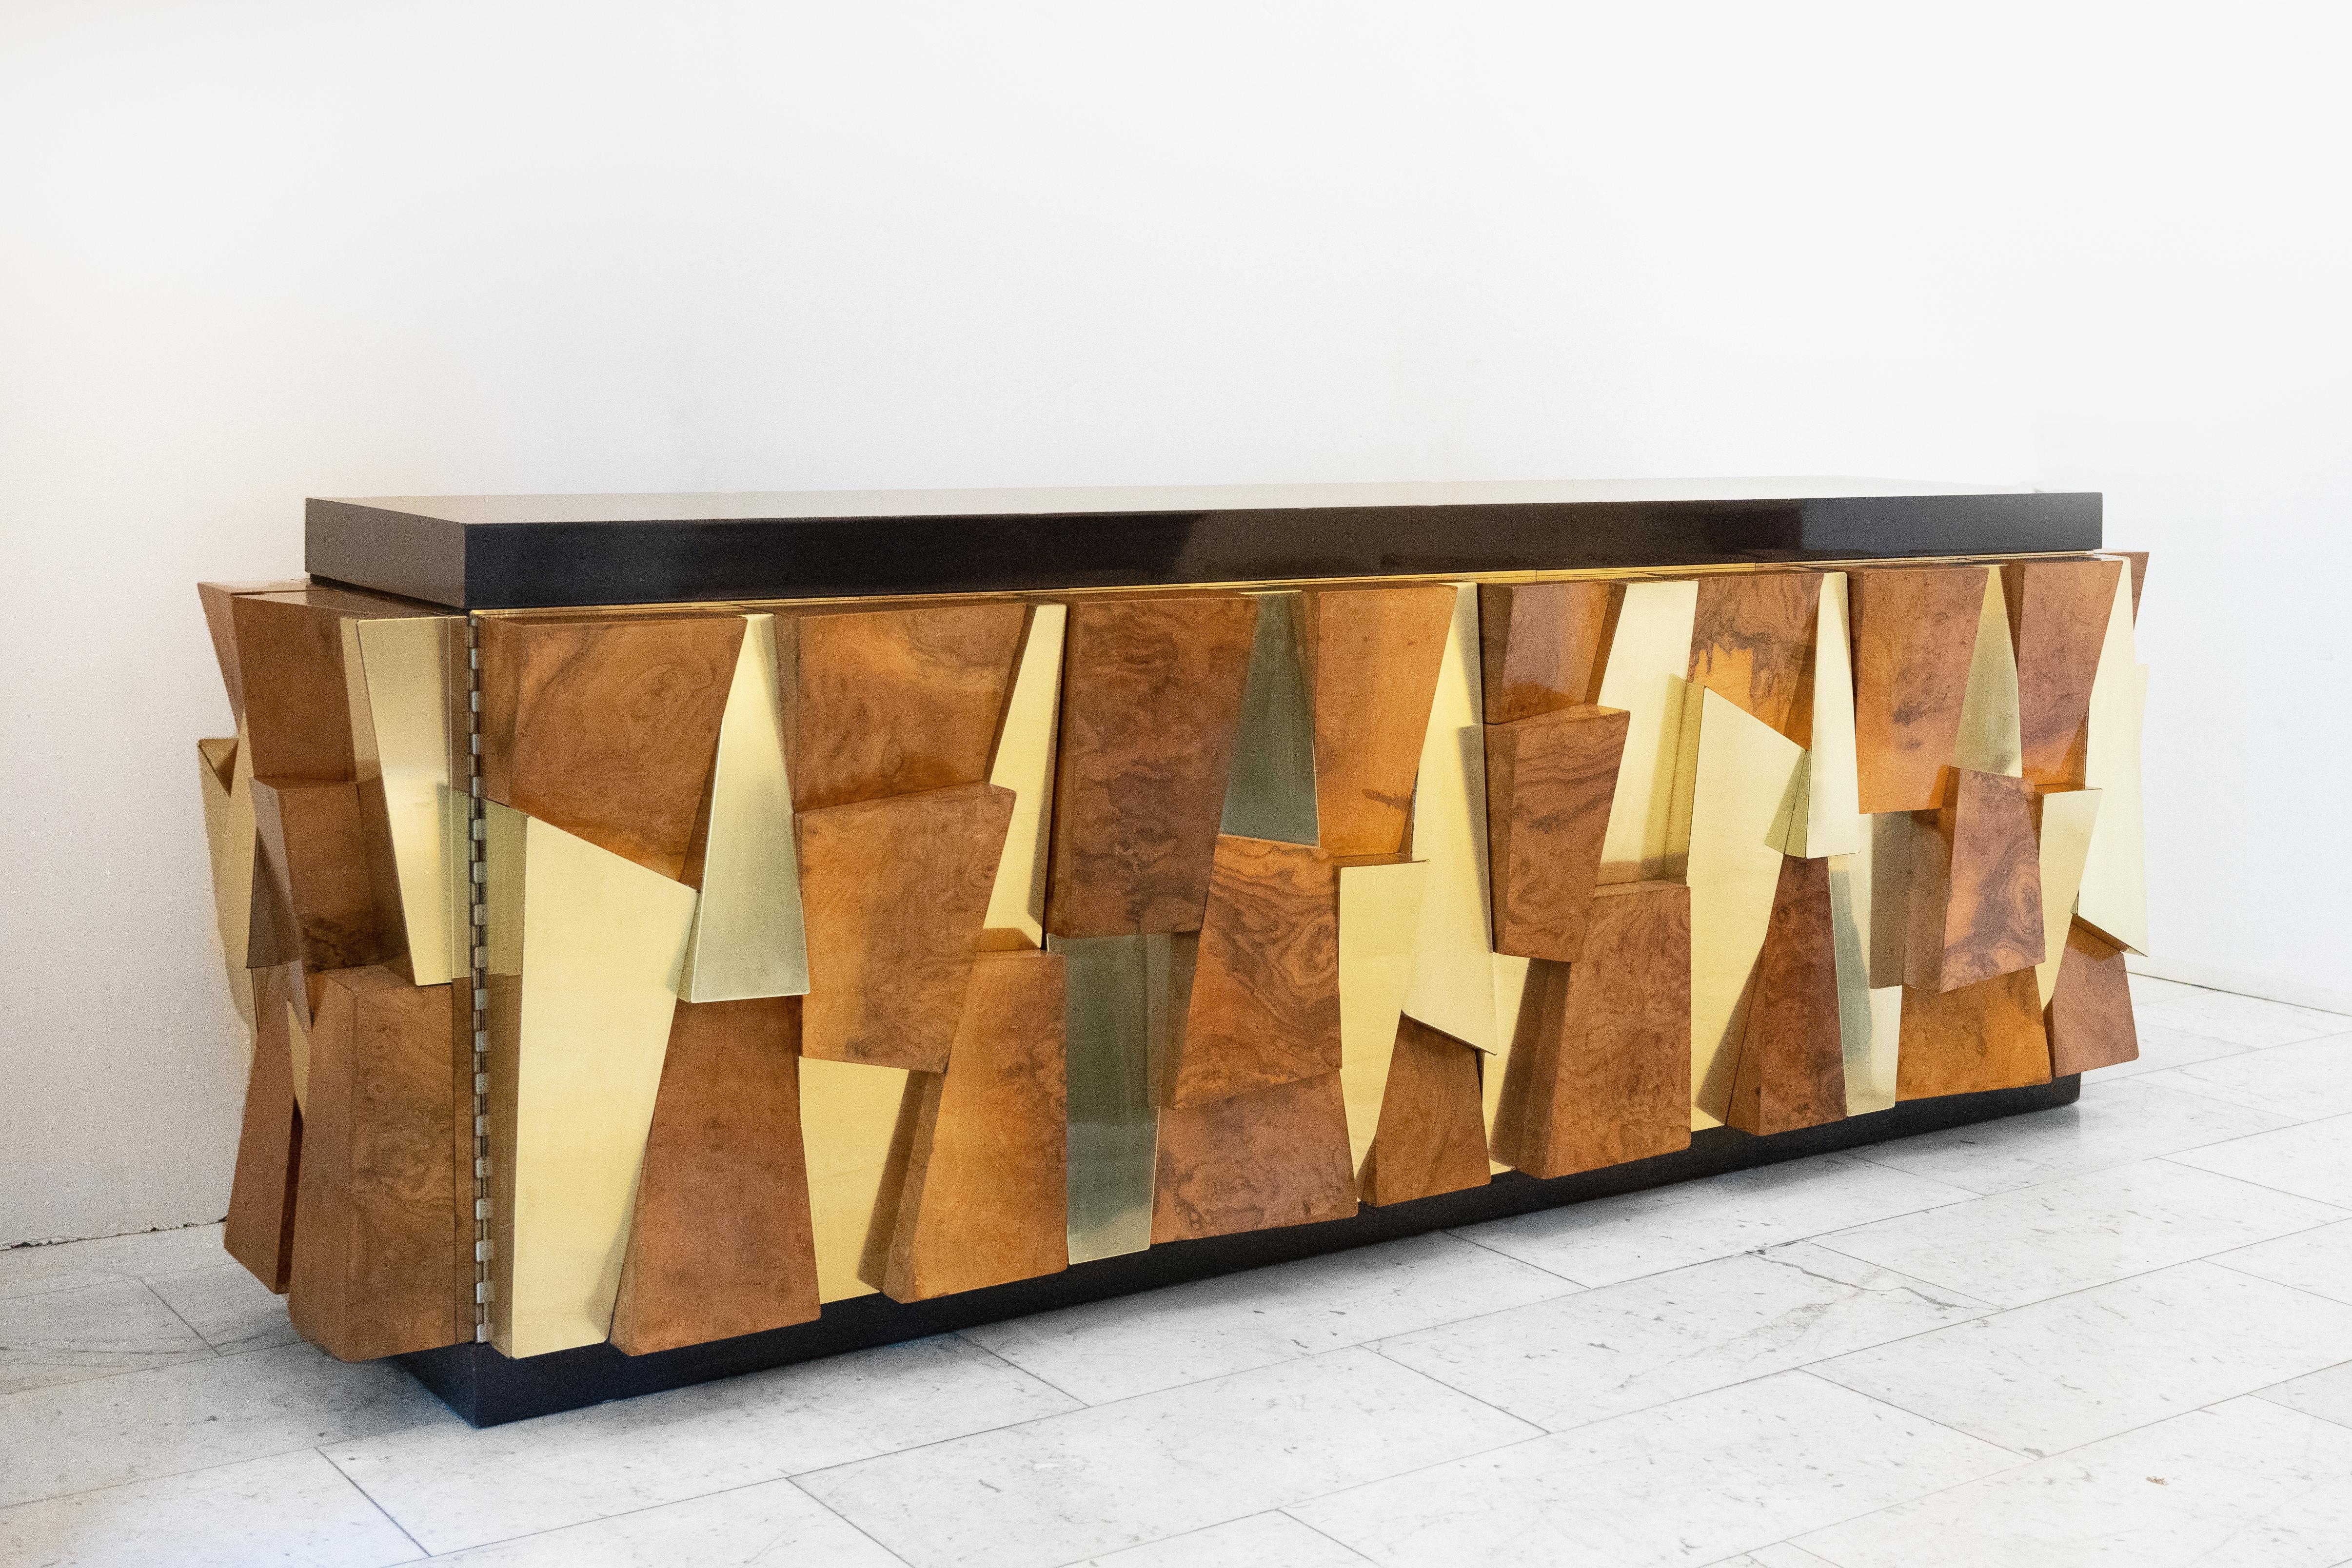 This exquisite and rare Faceted Cabinet (PE 380) was designed and completed by Paul Evans in his New Hope, Pennsylvania studio in 1980. Made of rich burled walnut, mirror polished brass, and a gel-coated fiberglass top, the console features 4